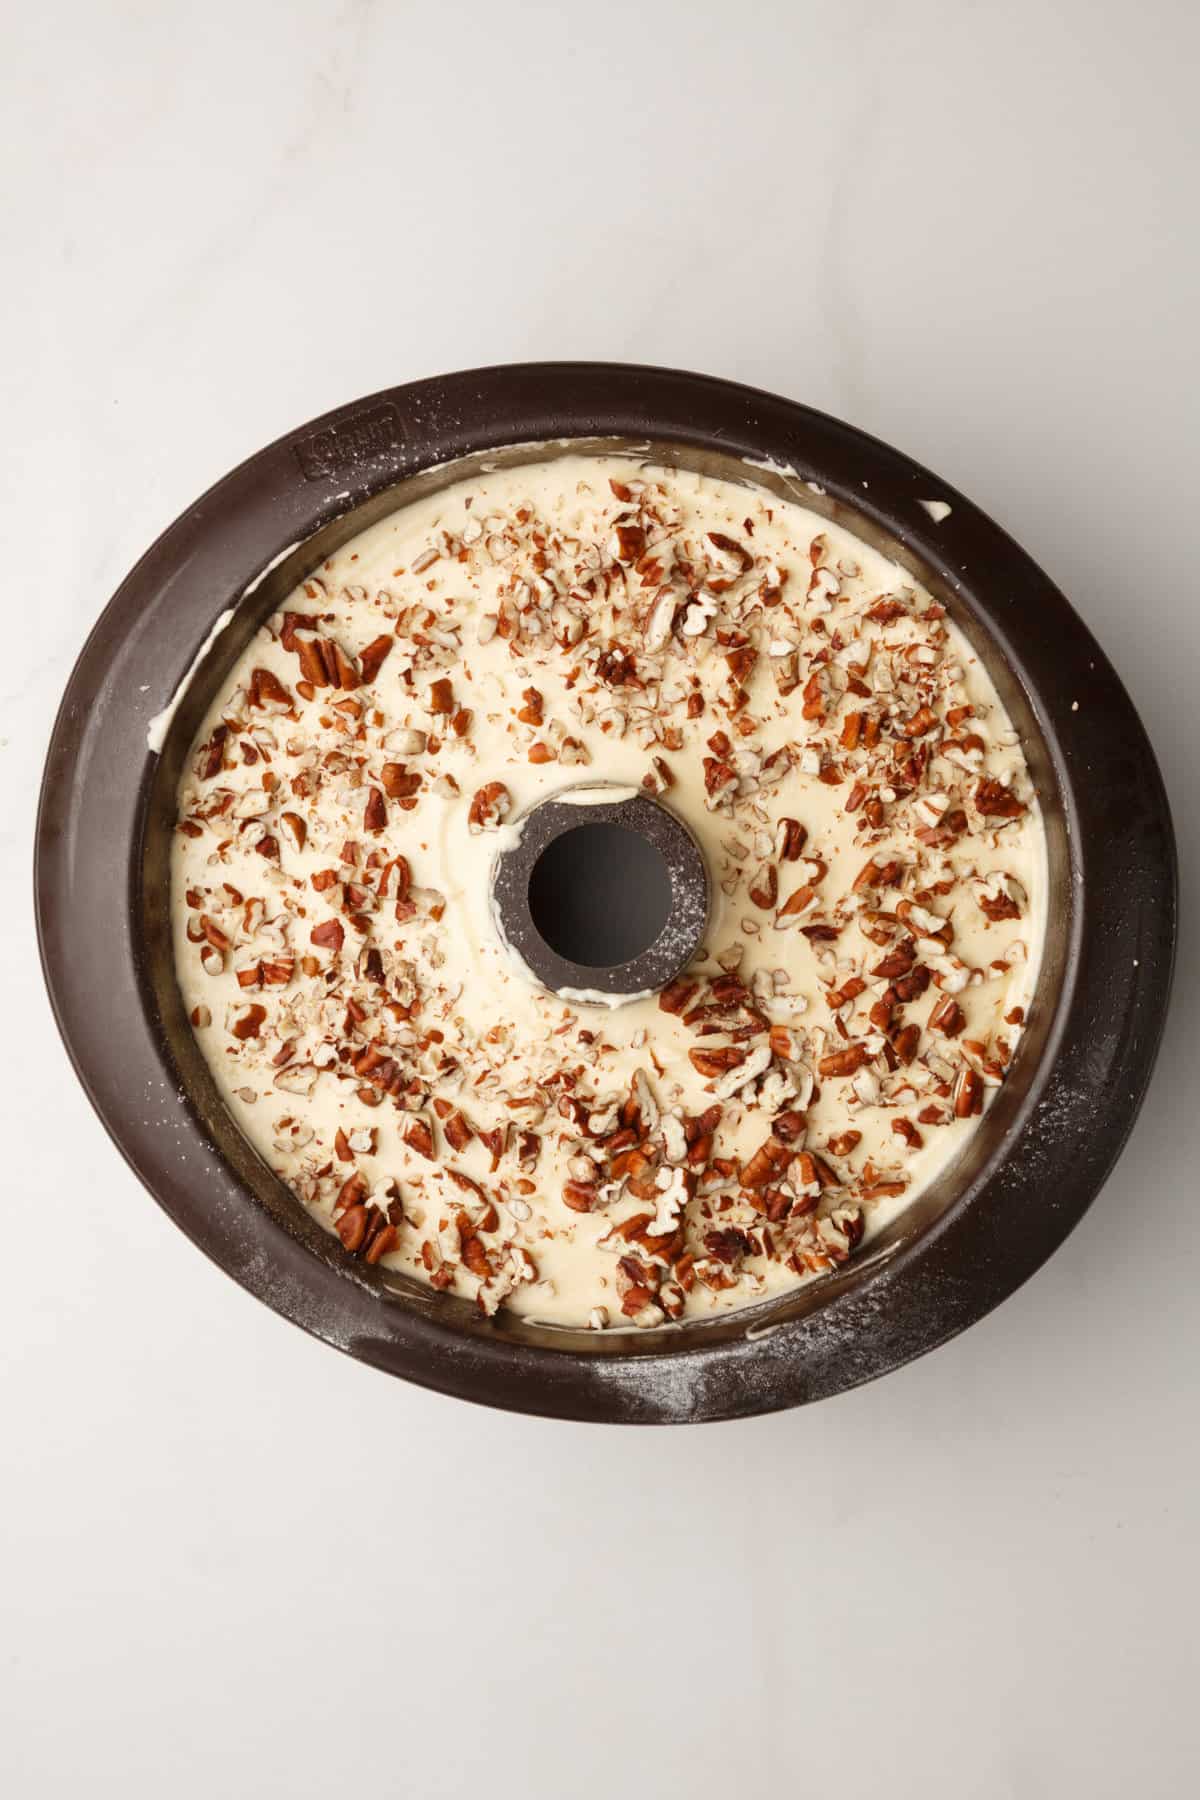 bundt cake tin with cake batter topped with chopped pecans.  